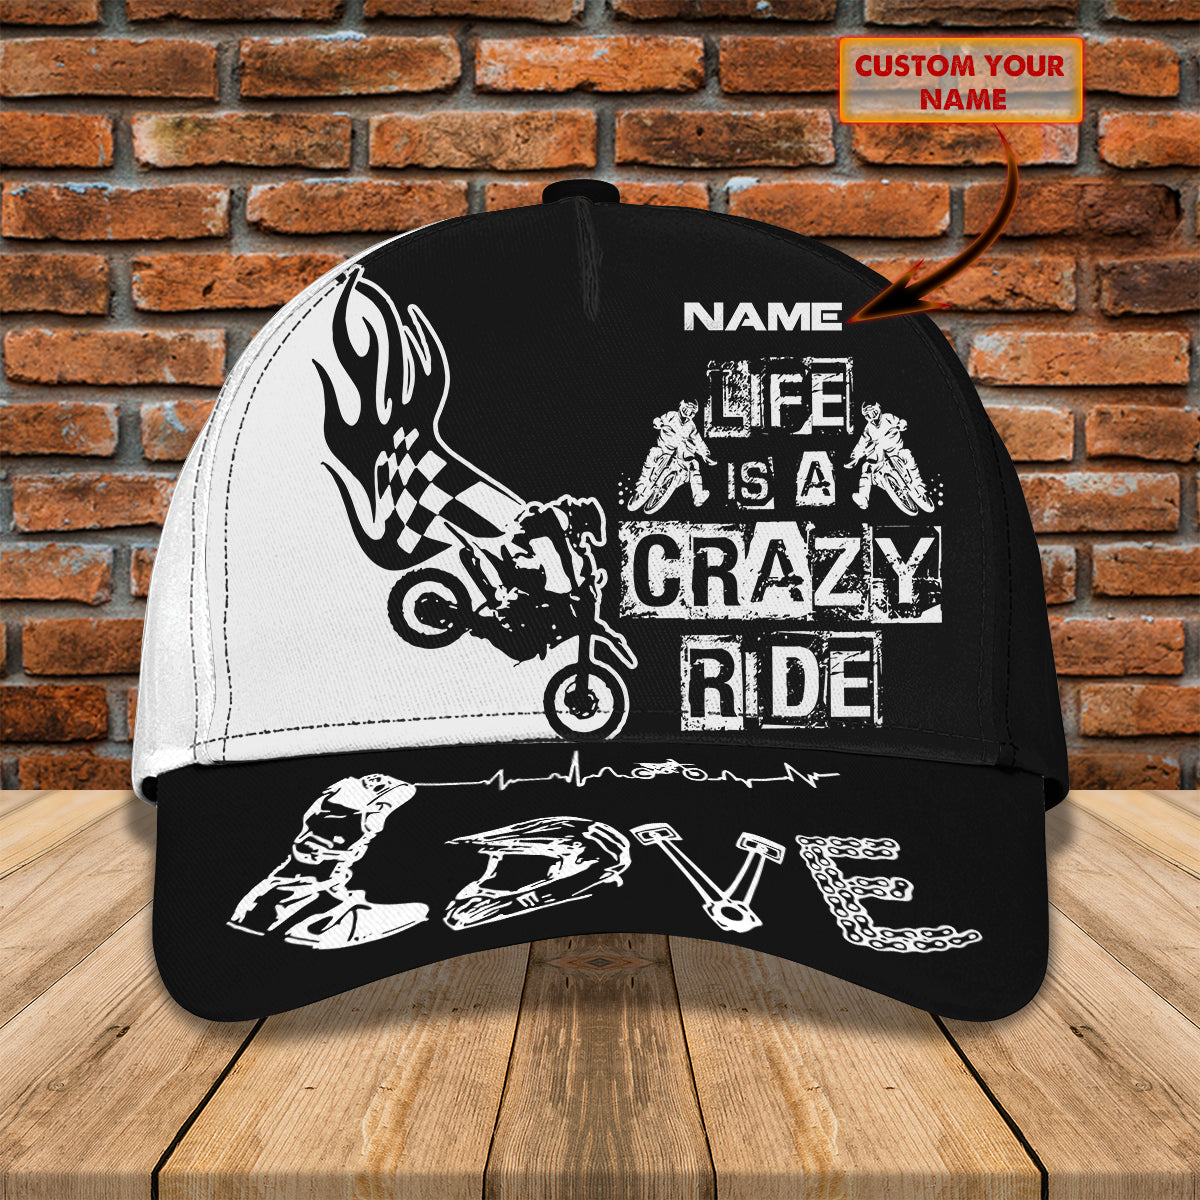 Personalized Motorcycle Racing 3D Full Printed Cap Hat/ Life Is A Crazy Ride Baseball Cap Hat